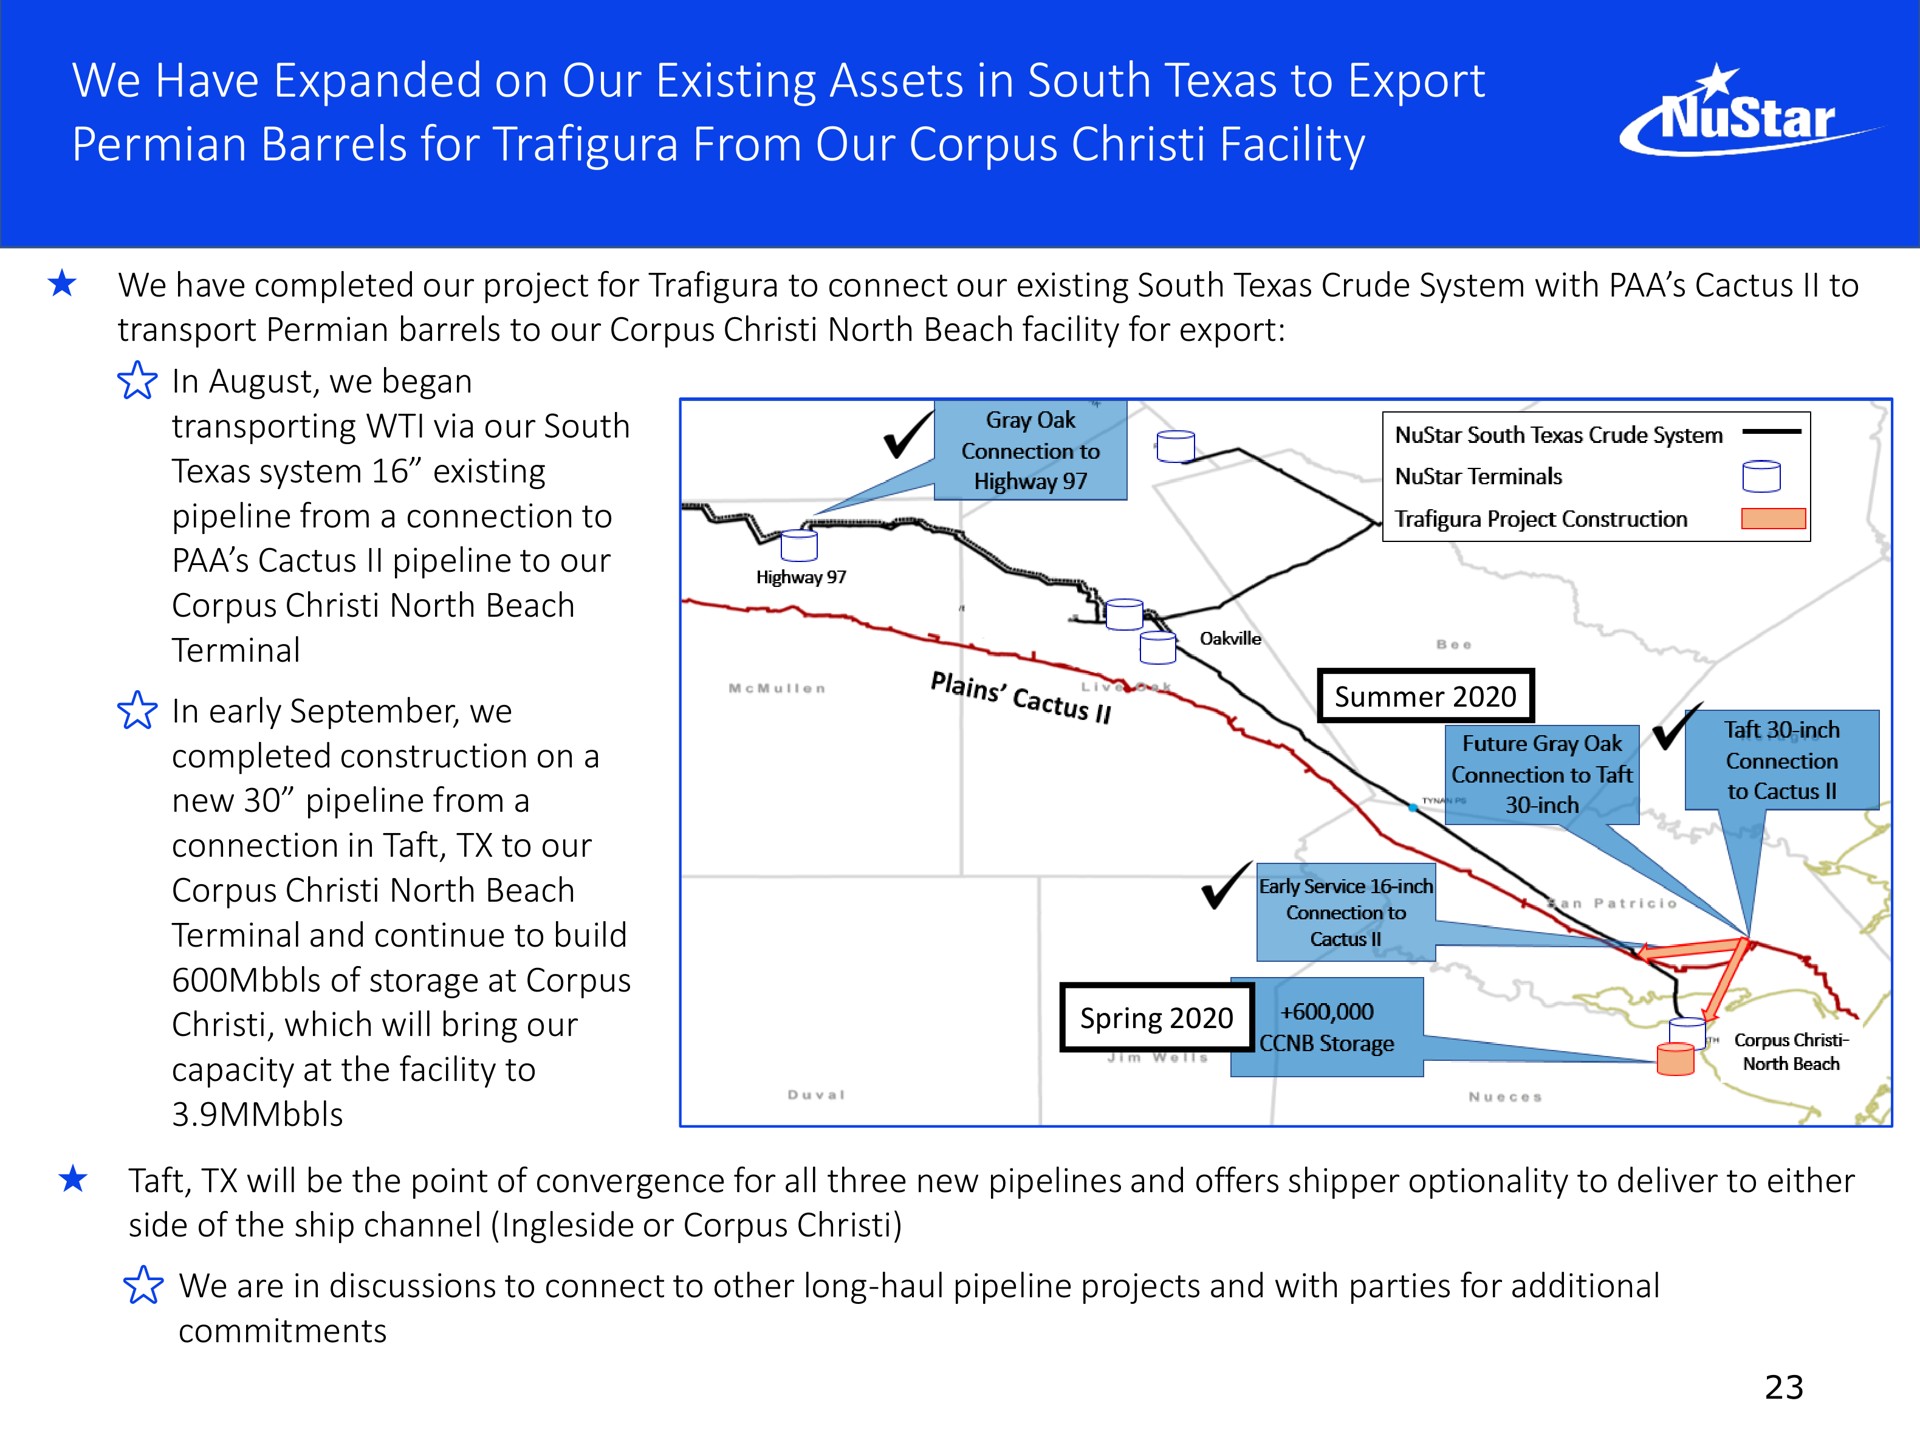 we have expanded on our existing assets in south to export barrels for from our corpus facility | NuStar Energy